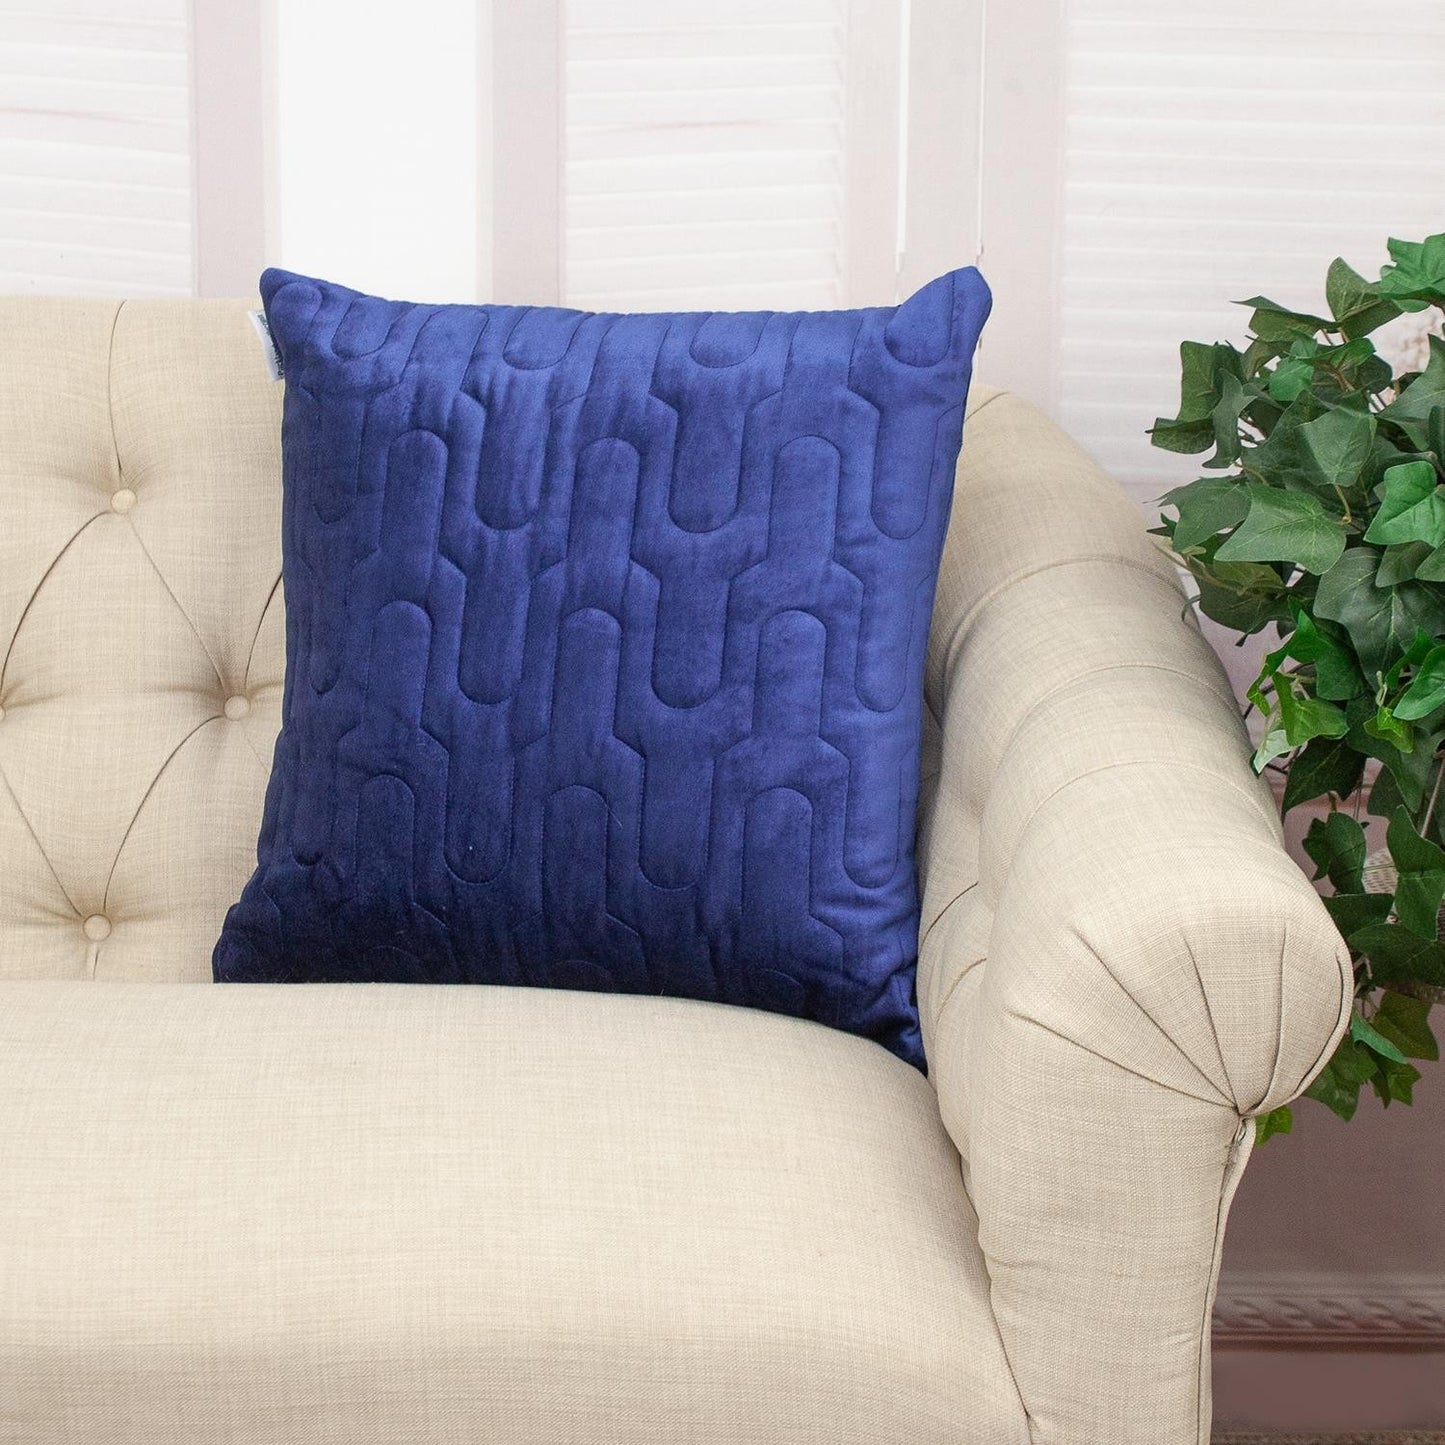 Geometric Lush Quilted Blue Throw Pillow